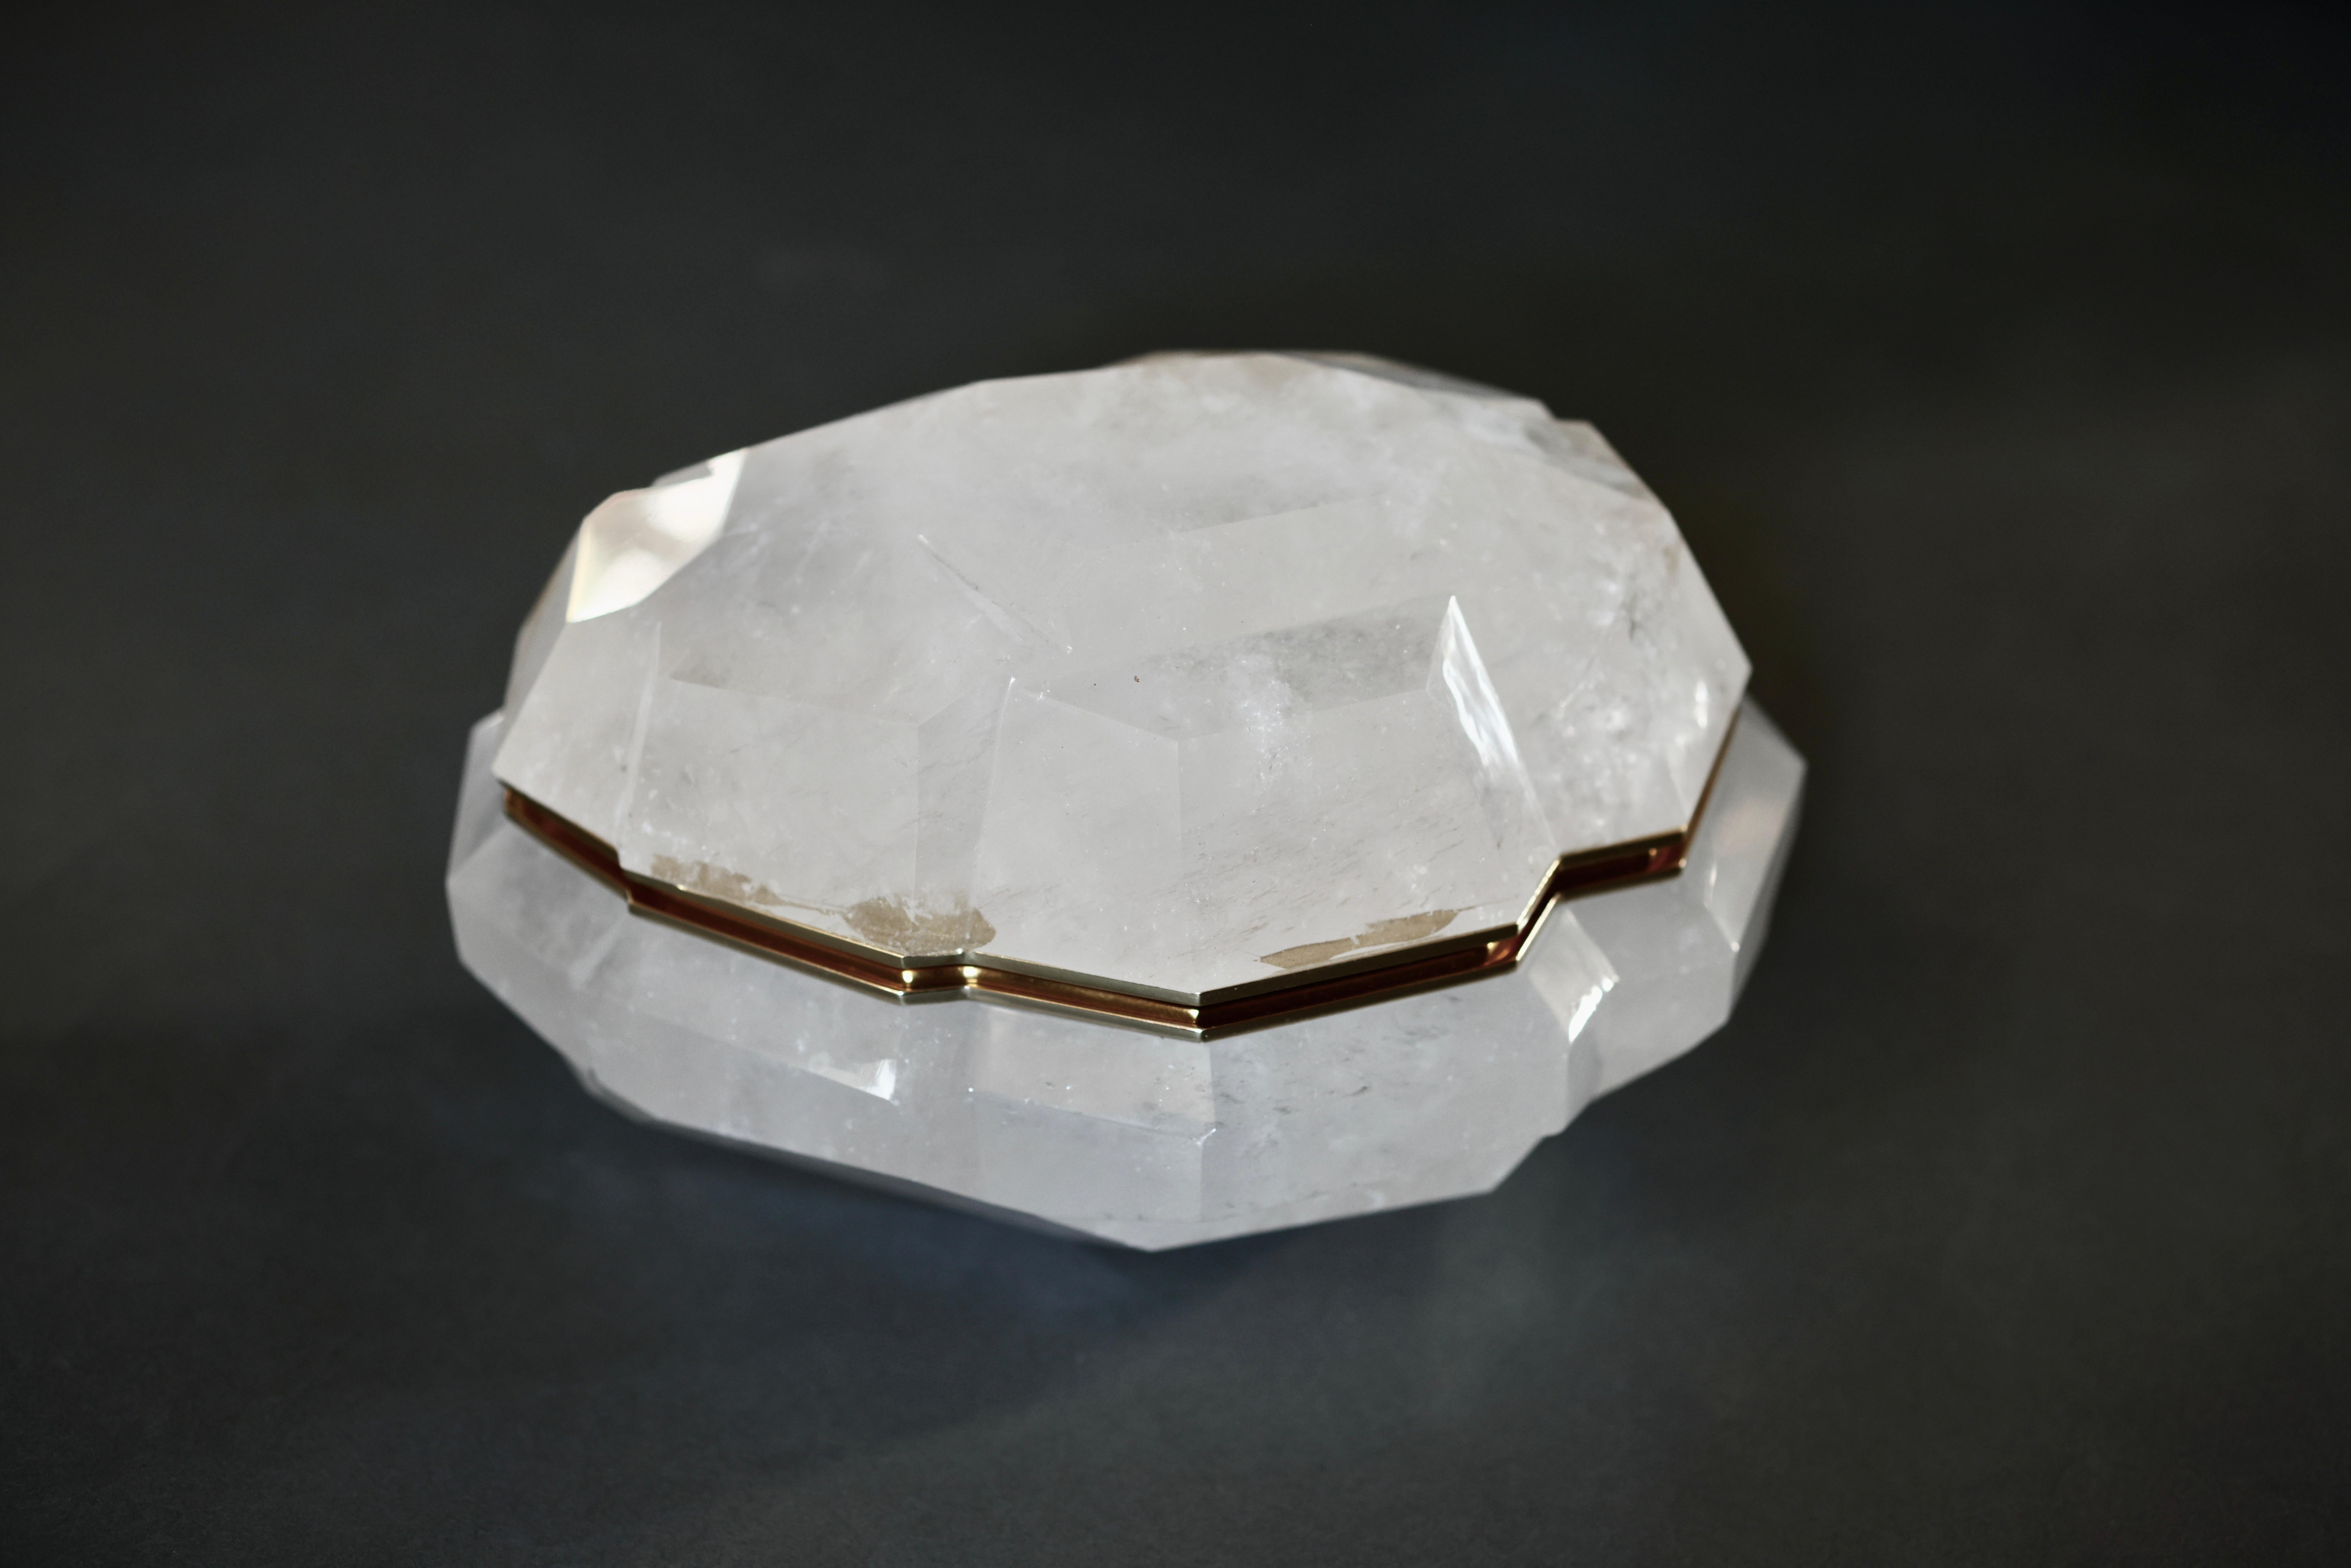 Finely carved multifaceted rock crystal boxes with cover. Polish brass decoration.
8”x 5.5” x 4”/H and 10.25” x 7.25” x 5.5”/H 
created by Phoenix Gallery.